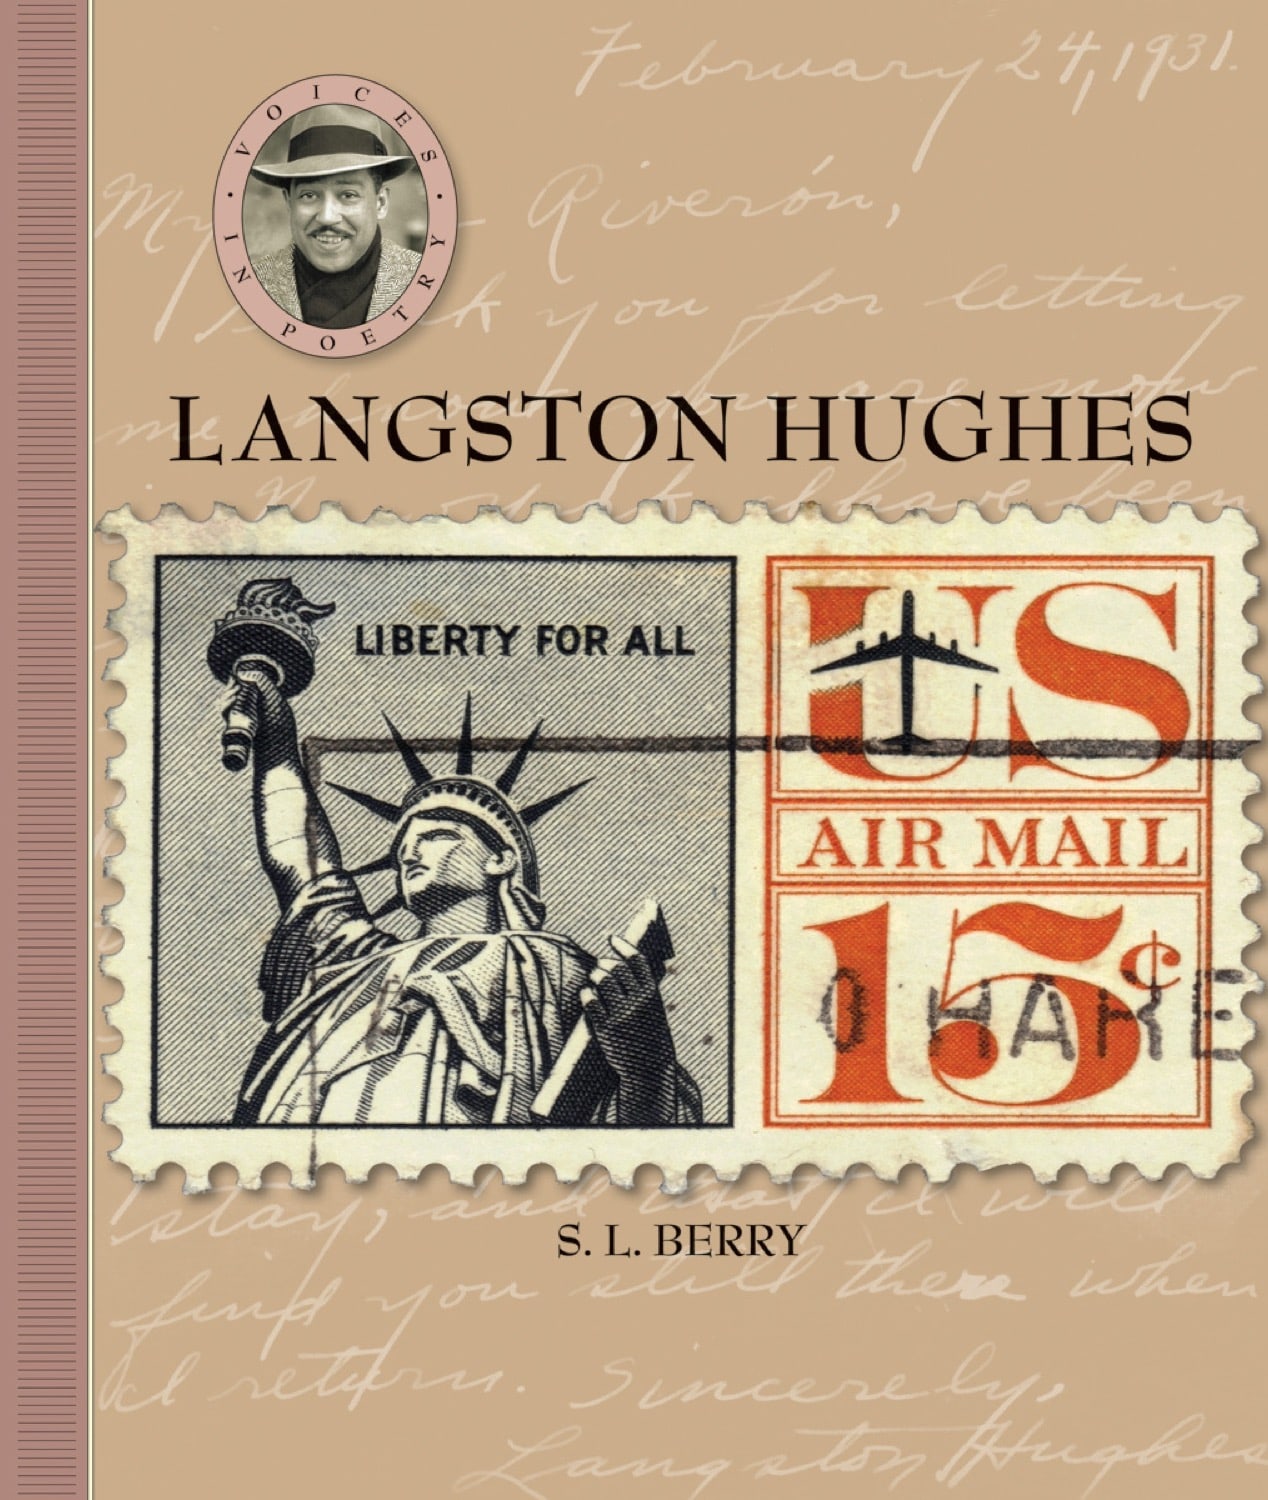 Voices in Poetry: Langston Hughes